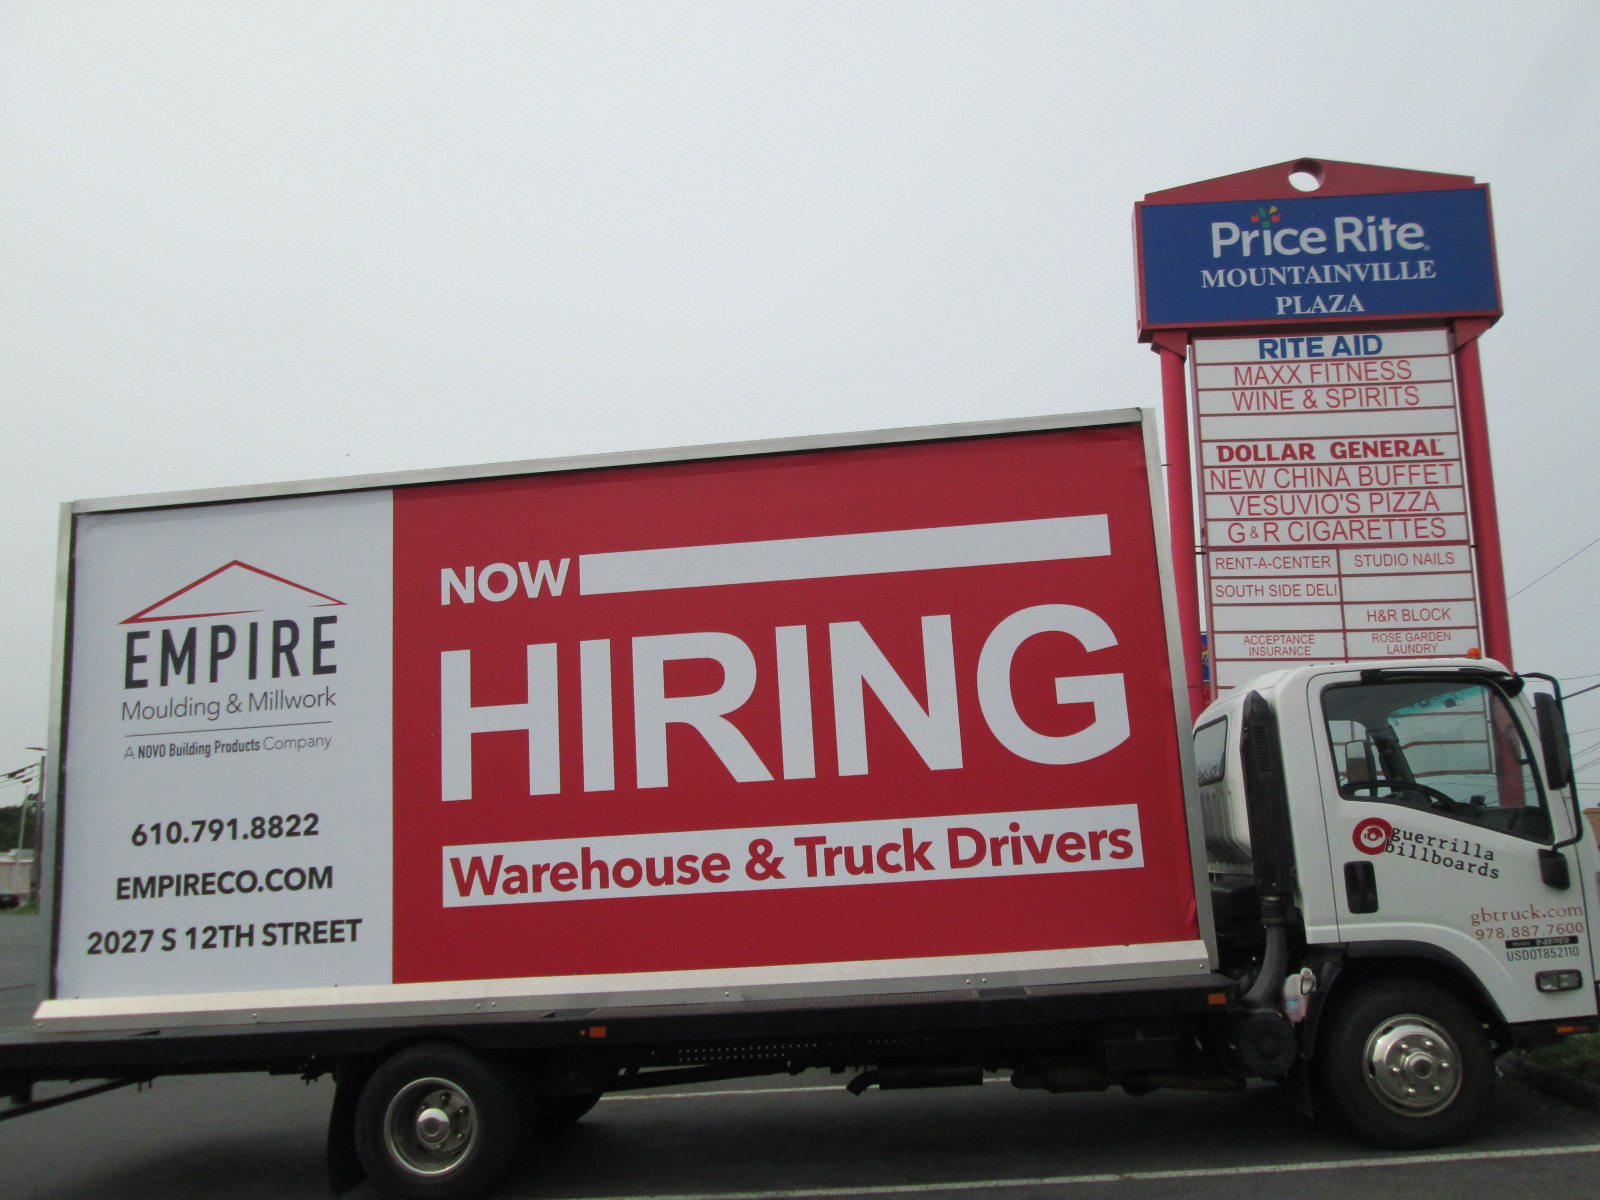 Now Hiring ad on a mobile billboard truck in Lehigh Valley PA